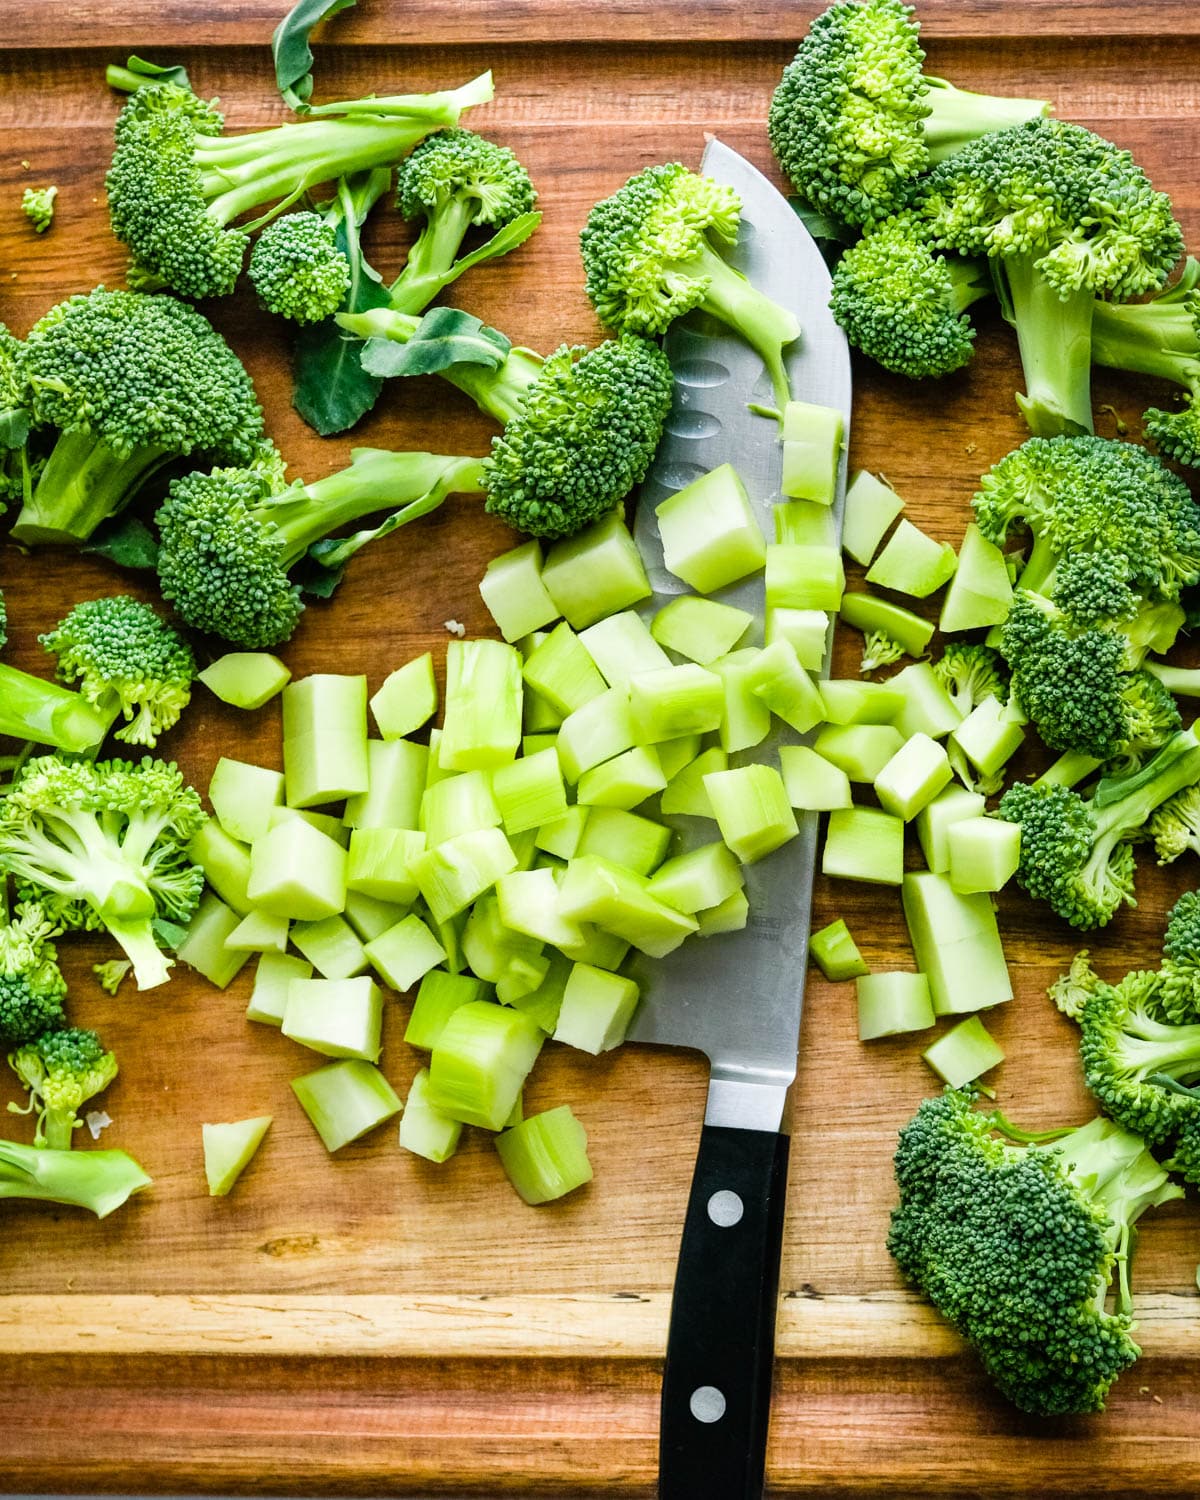 Chopping broccoli florets and stems.